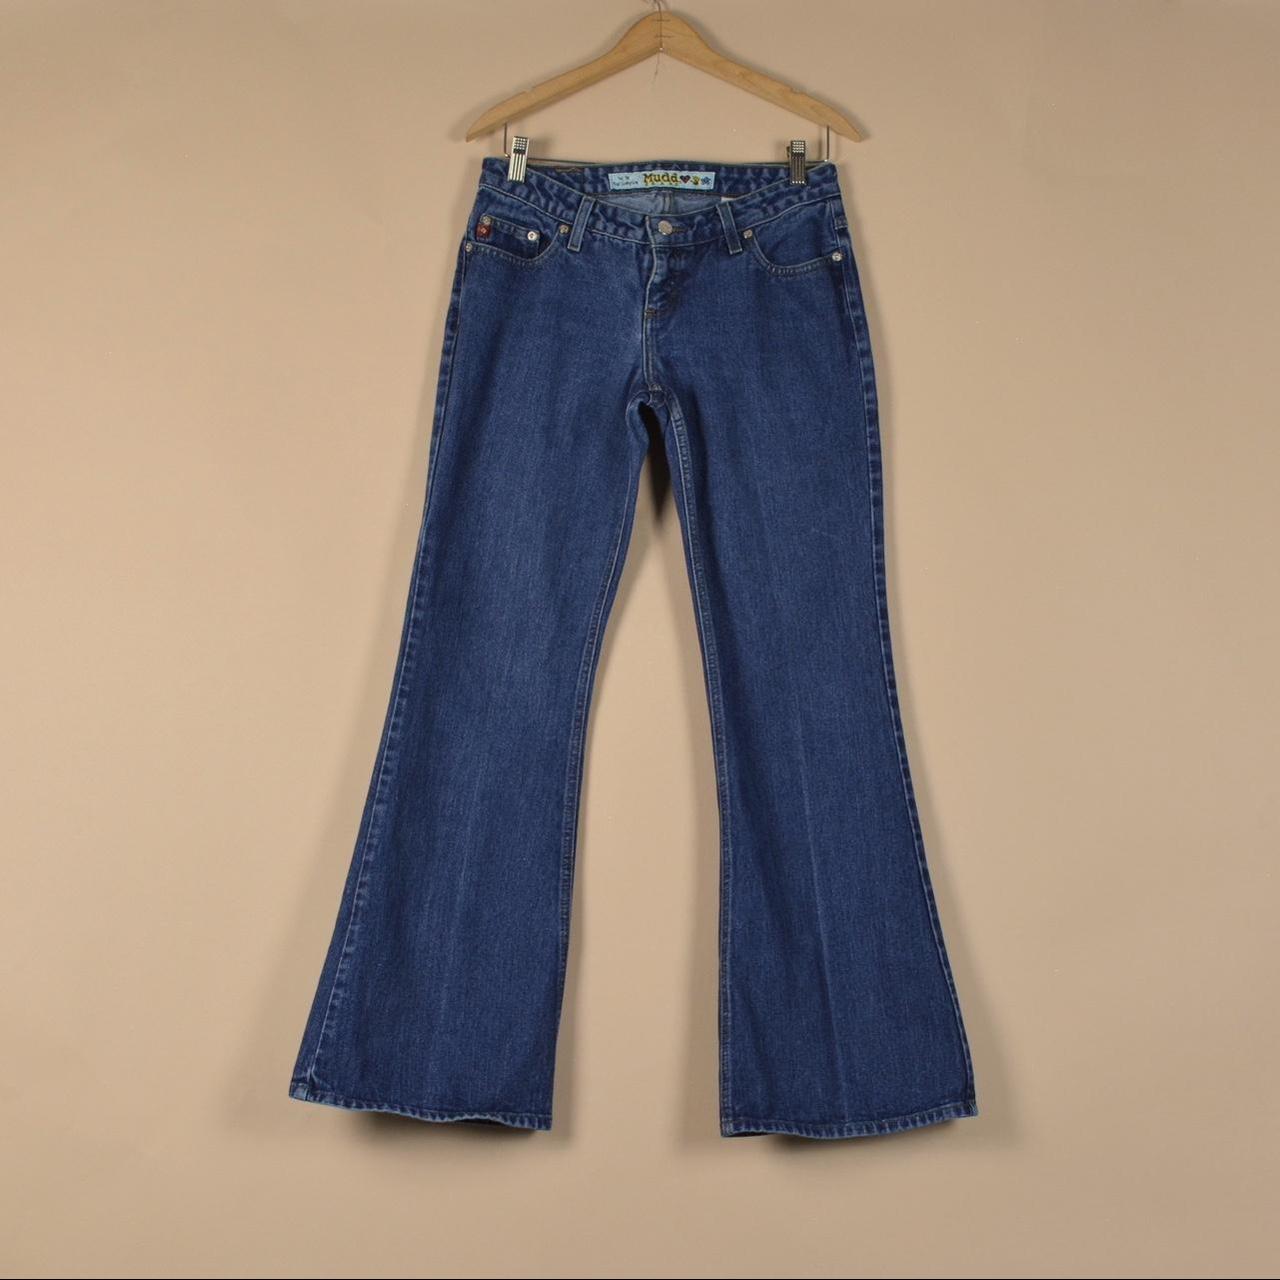 Vintage Wash Y2K Flare Jeans  Clothes, Fashion outfits, Jeans online store